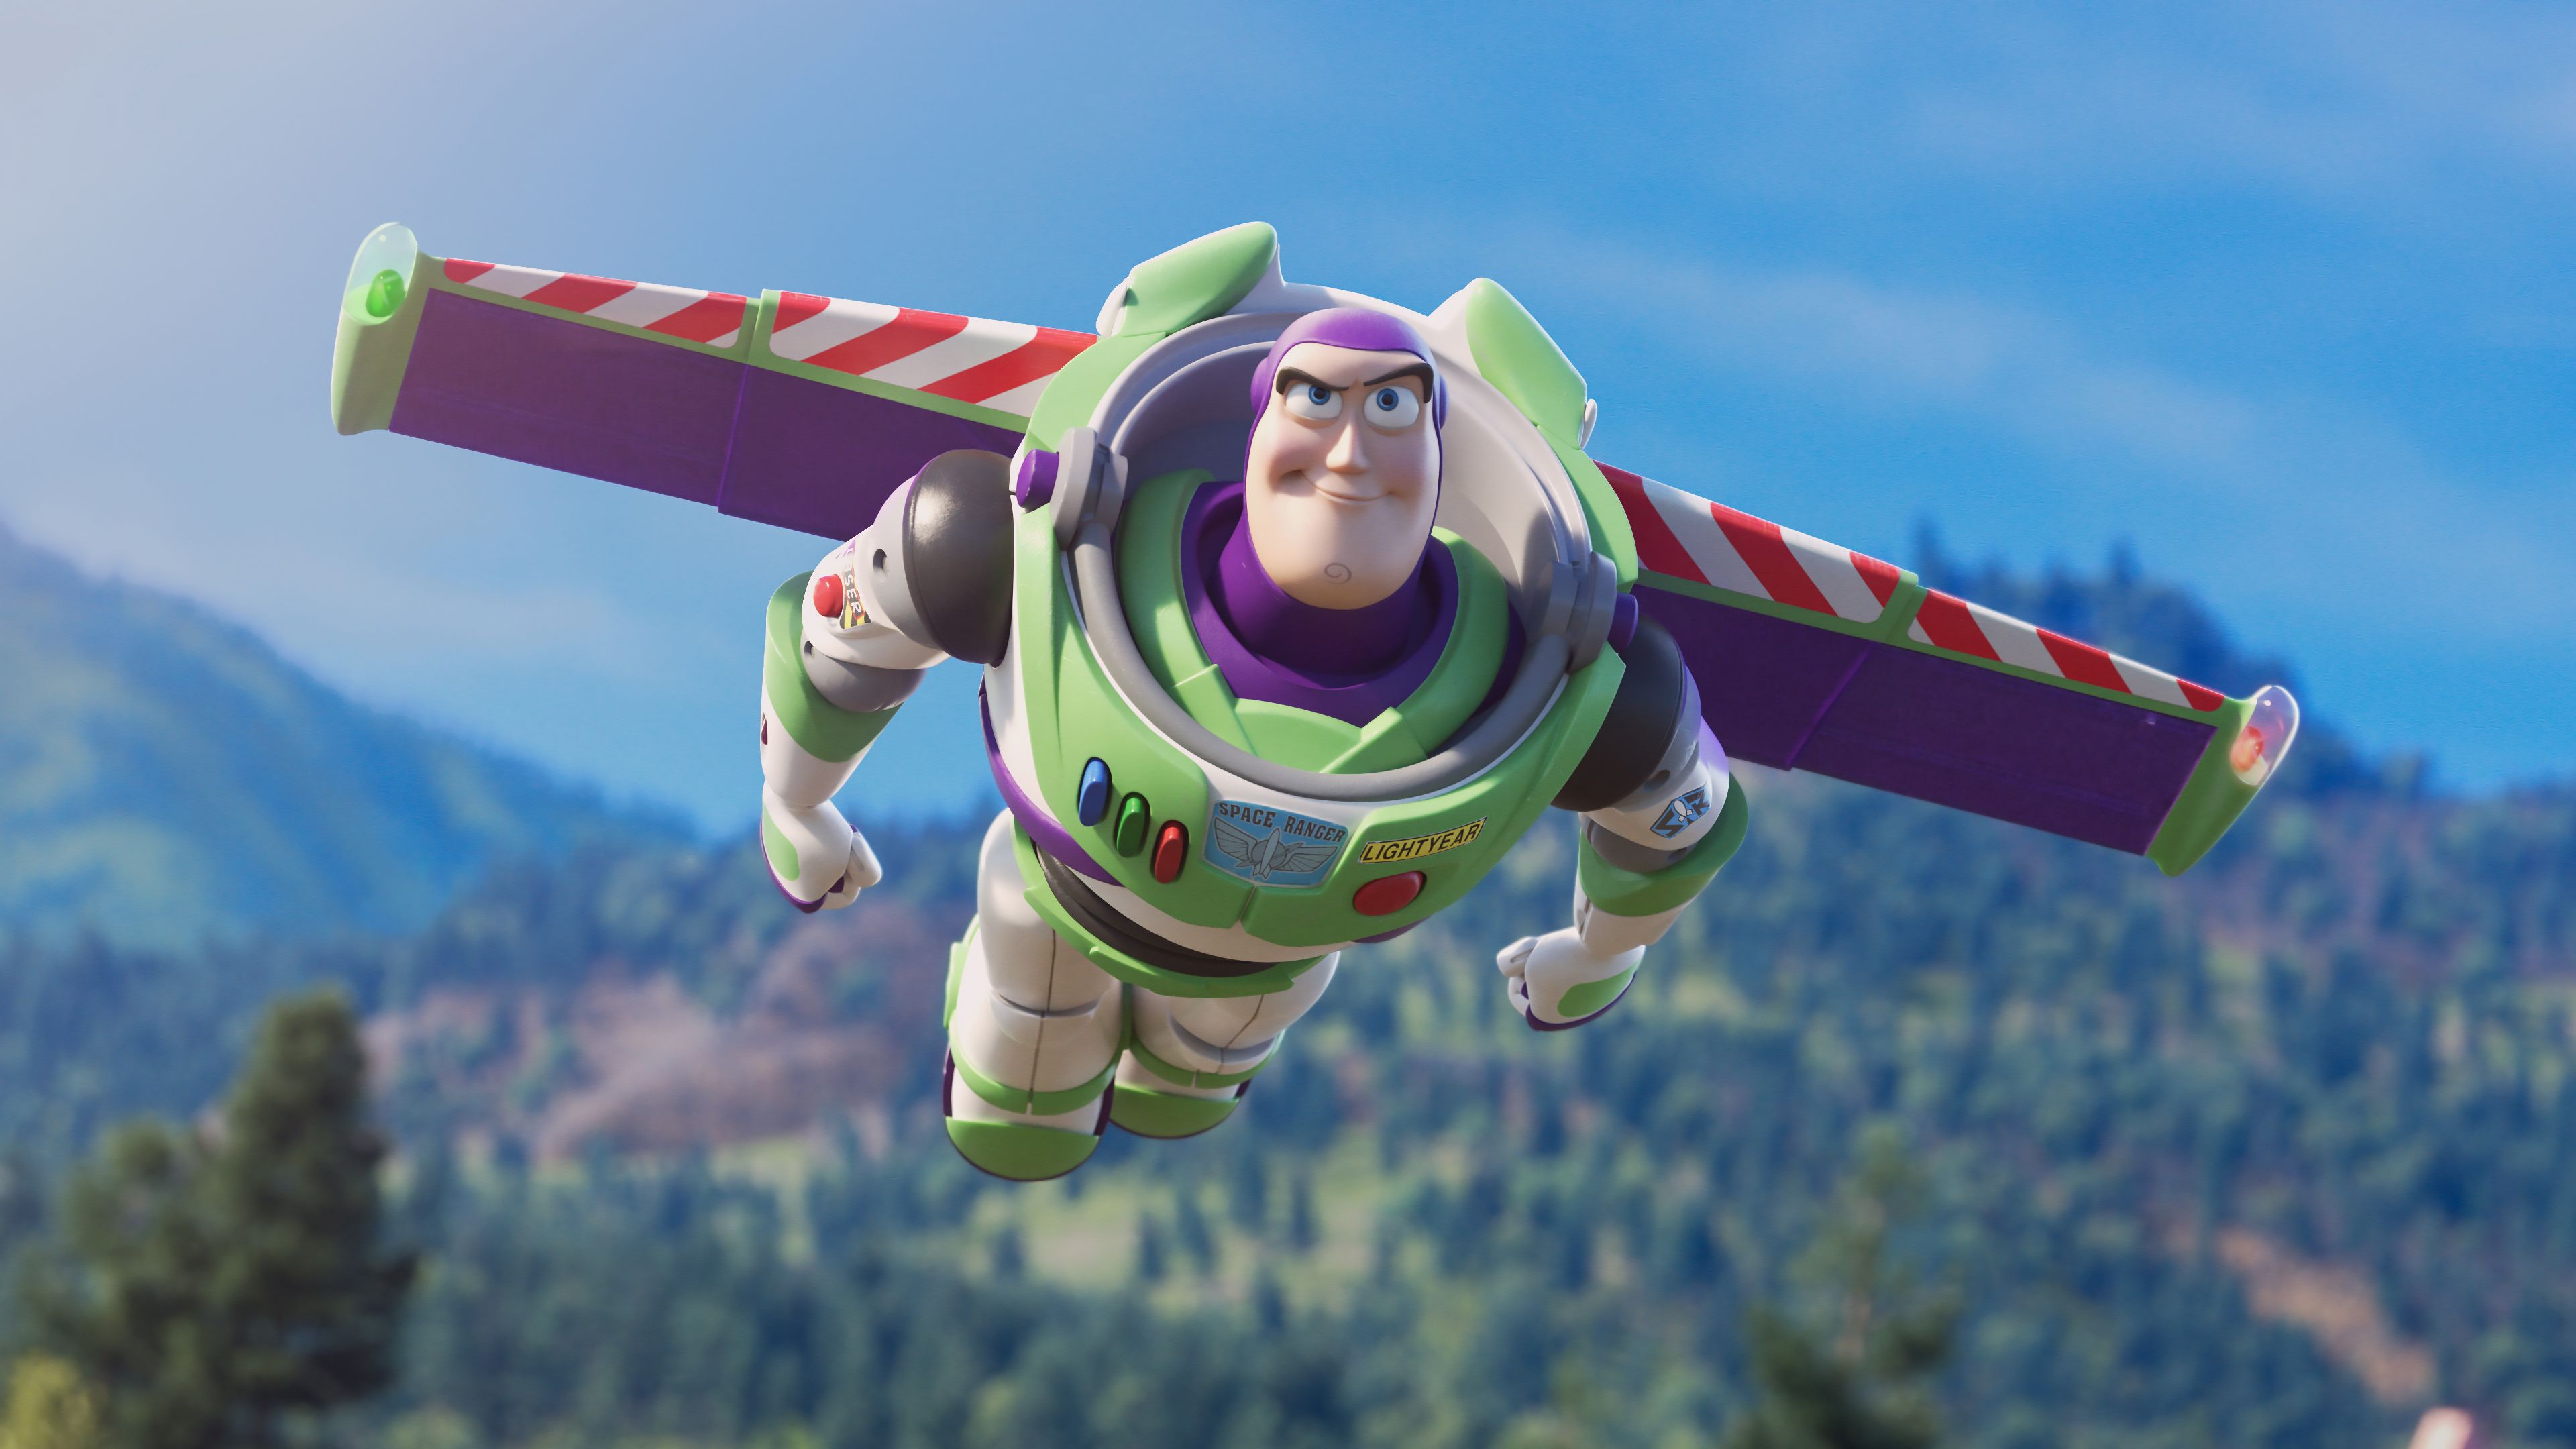 Buzz Lightyear Flying Wallpapers - Wallpaper Cave.